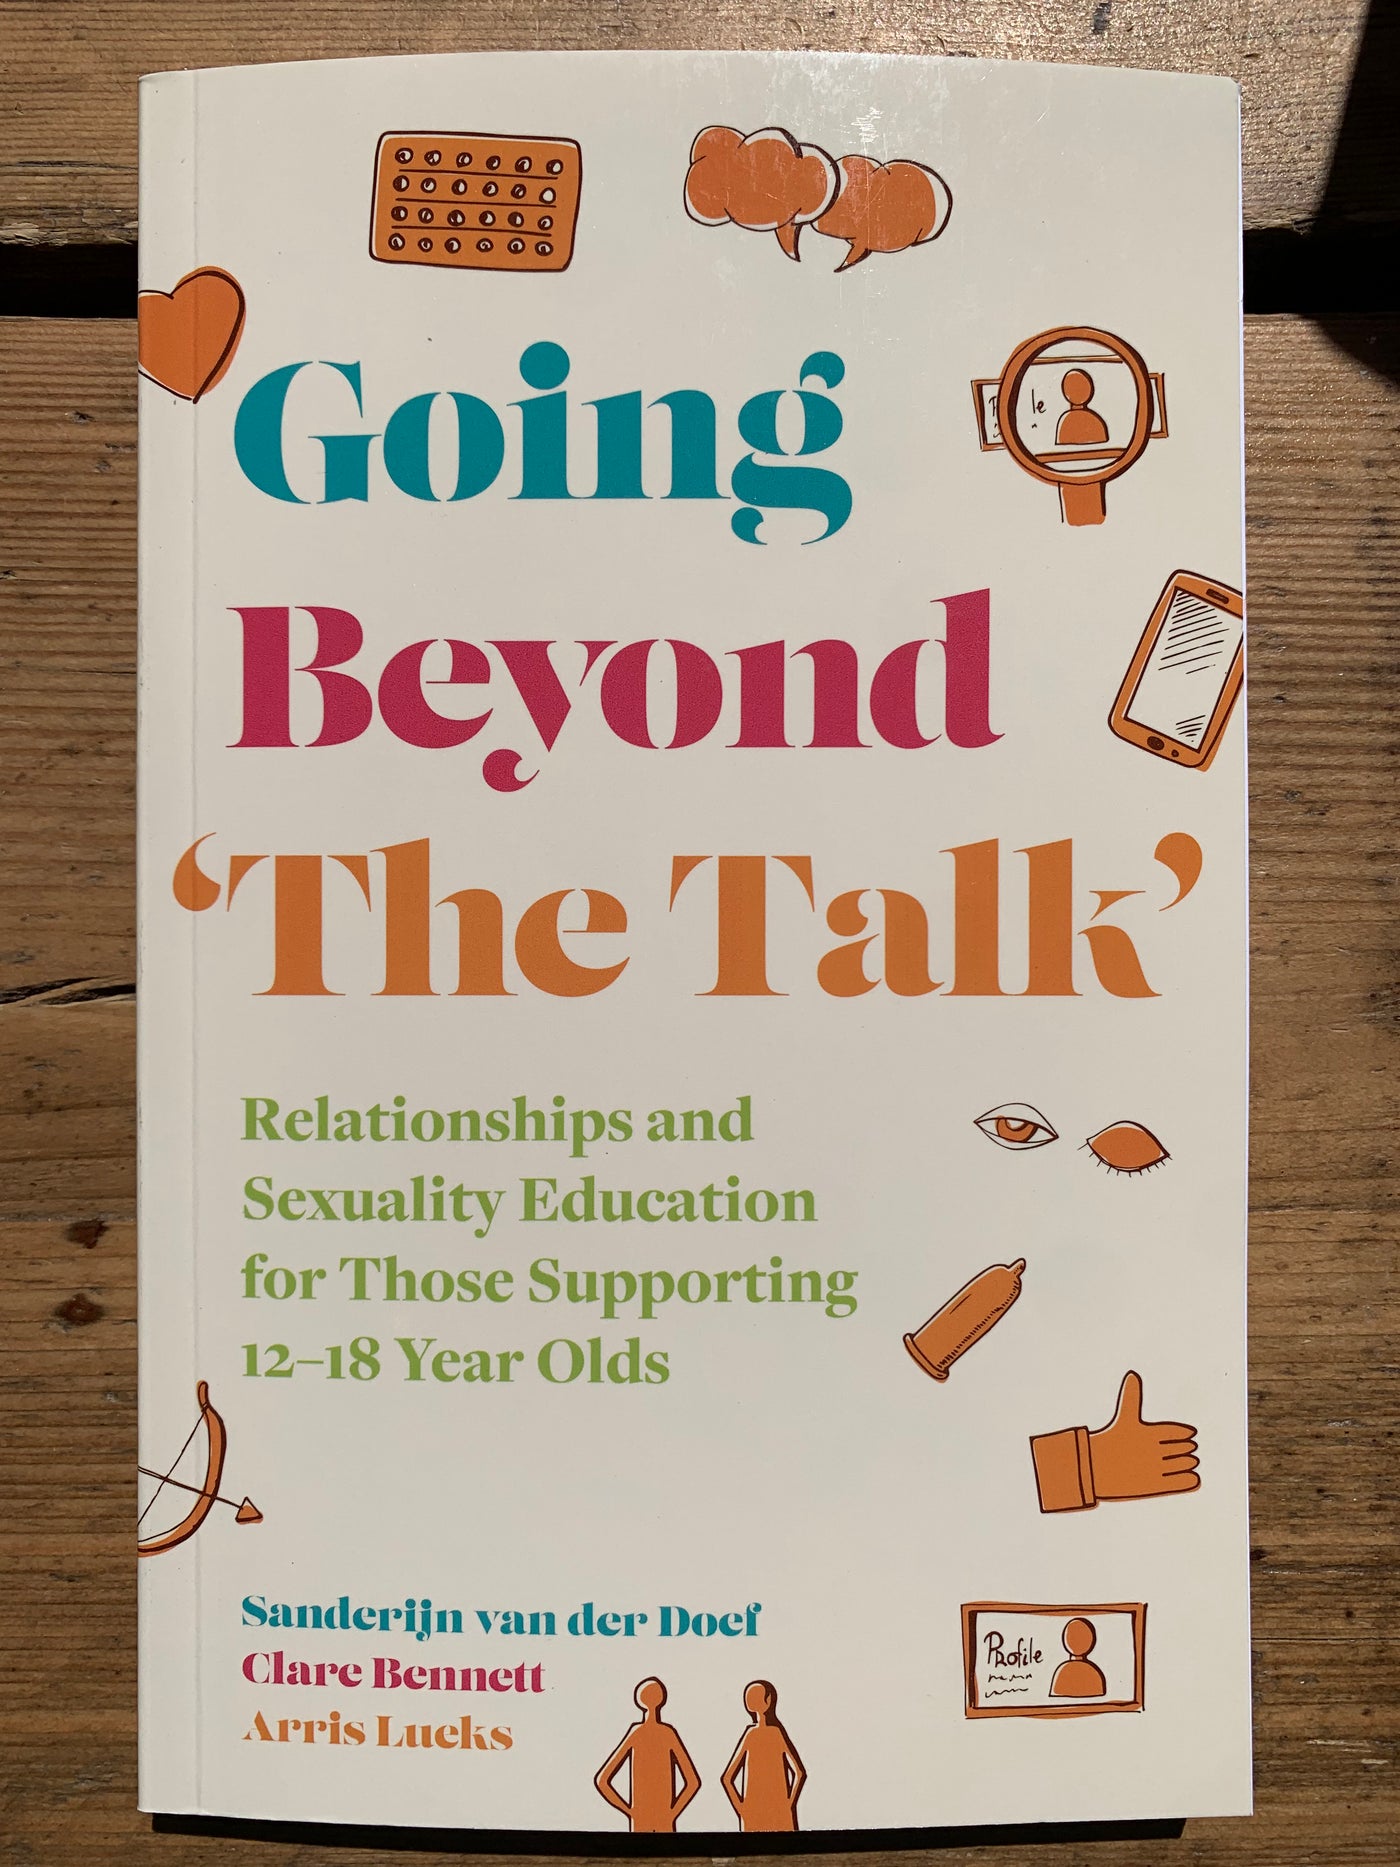 Going Beyond 'The Talk'